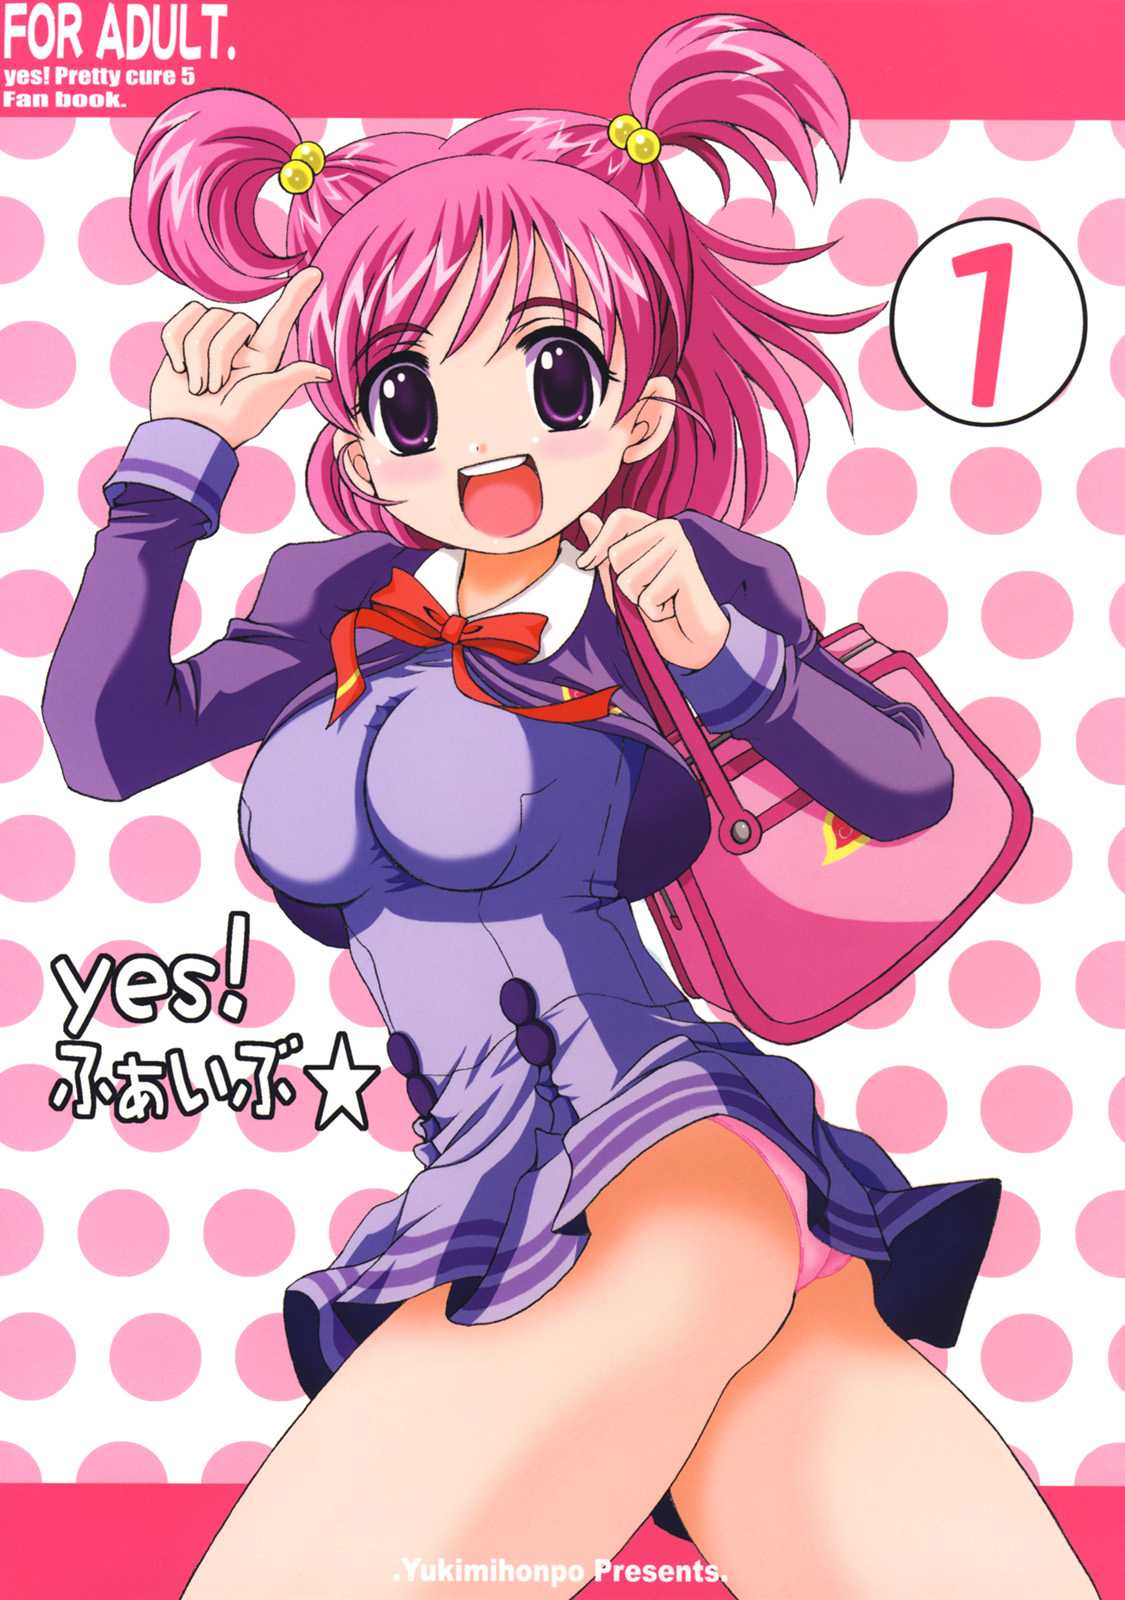 [Yukimihonpo] yes! Five 1 (yes! Pretty Cure 5) 